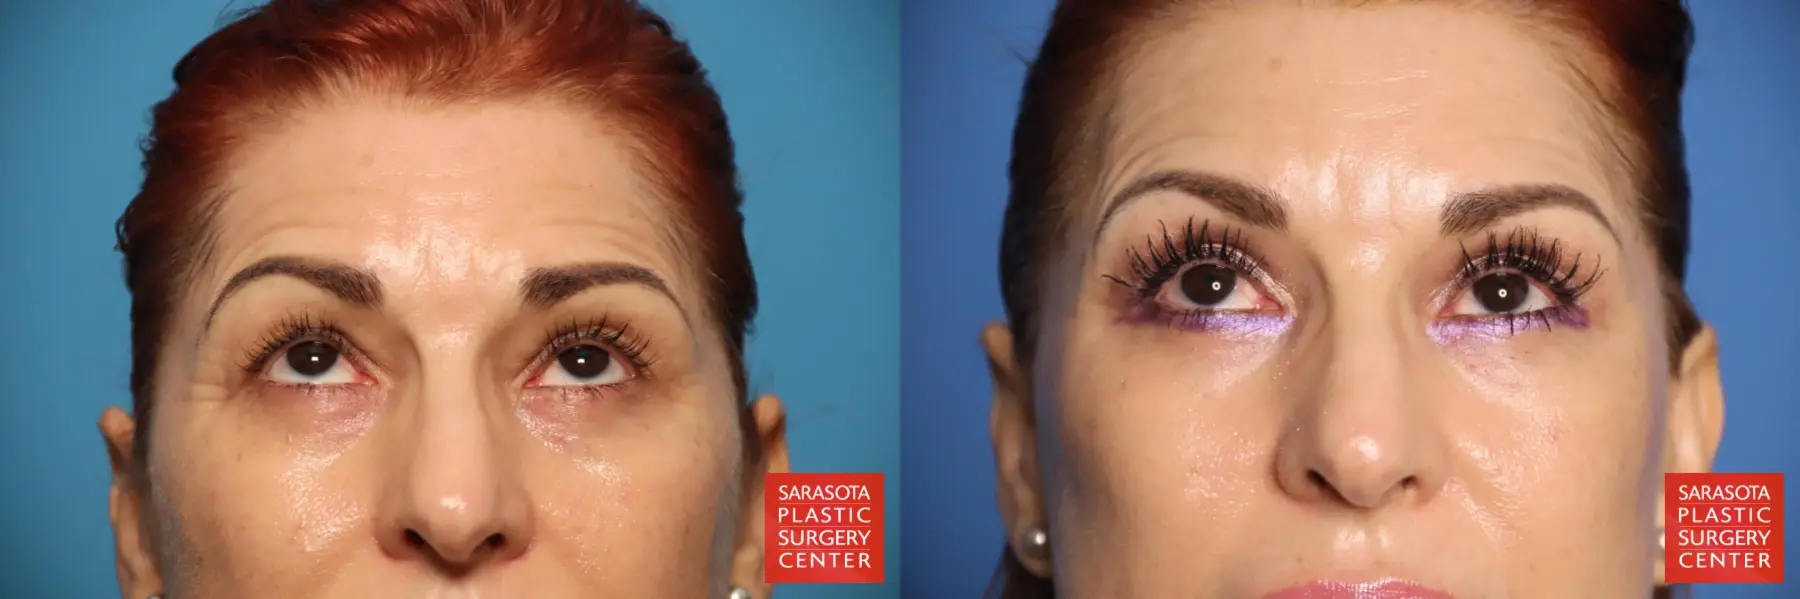 Brow Lift: Patient 3 - Before and After 2